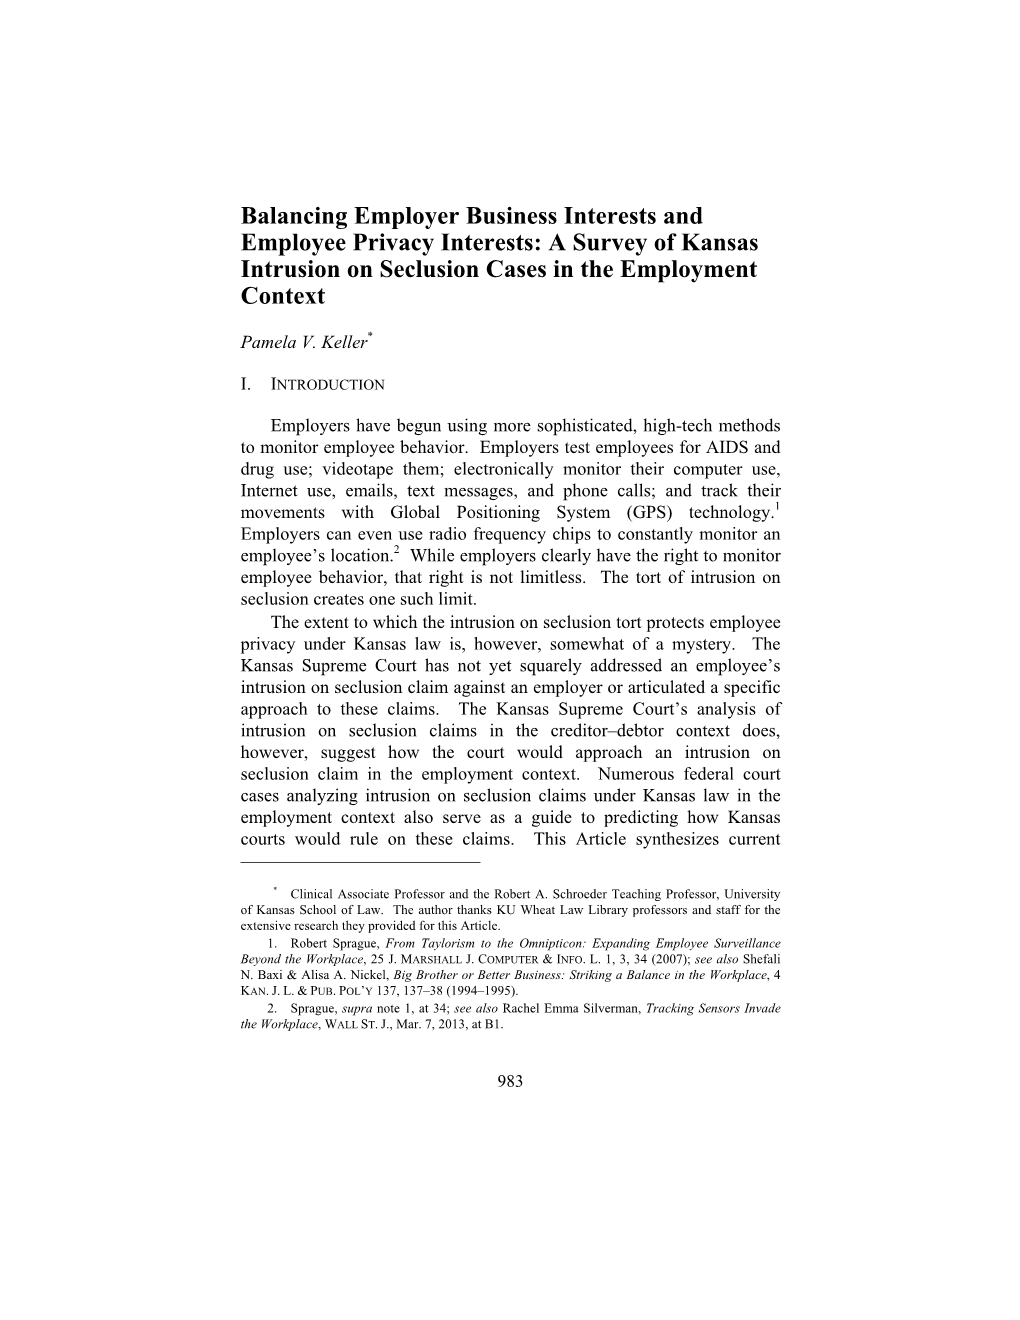 Balancing Employer Business Interests and Employee Privacy Interests: a Survey of Kansas Intrusion on Seclusion Cases in the Employment Context